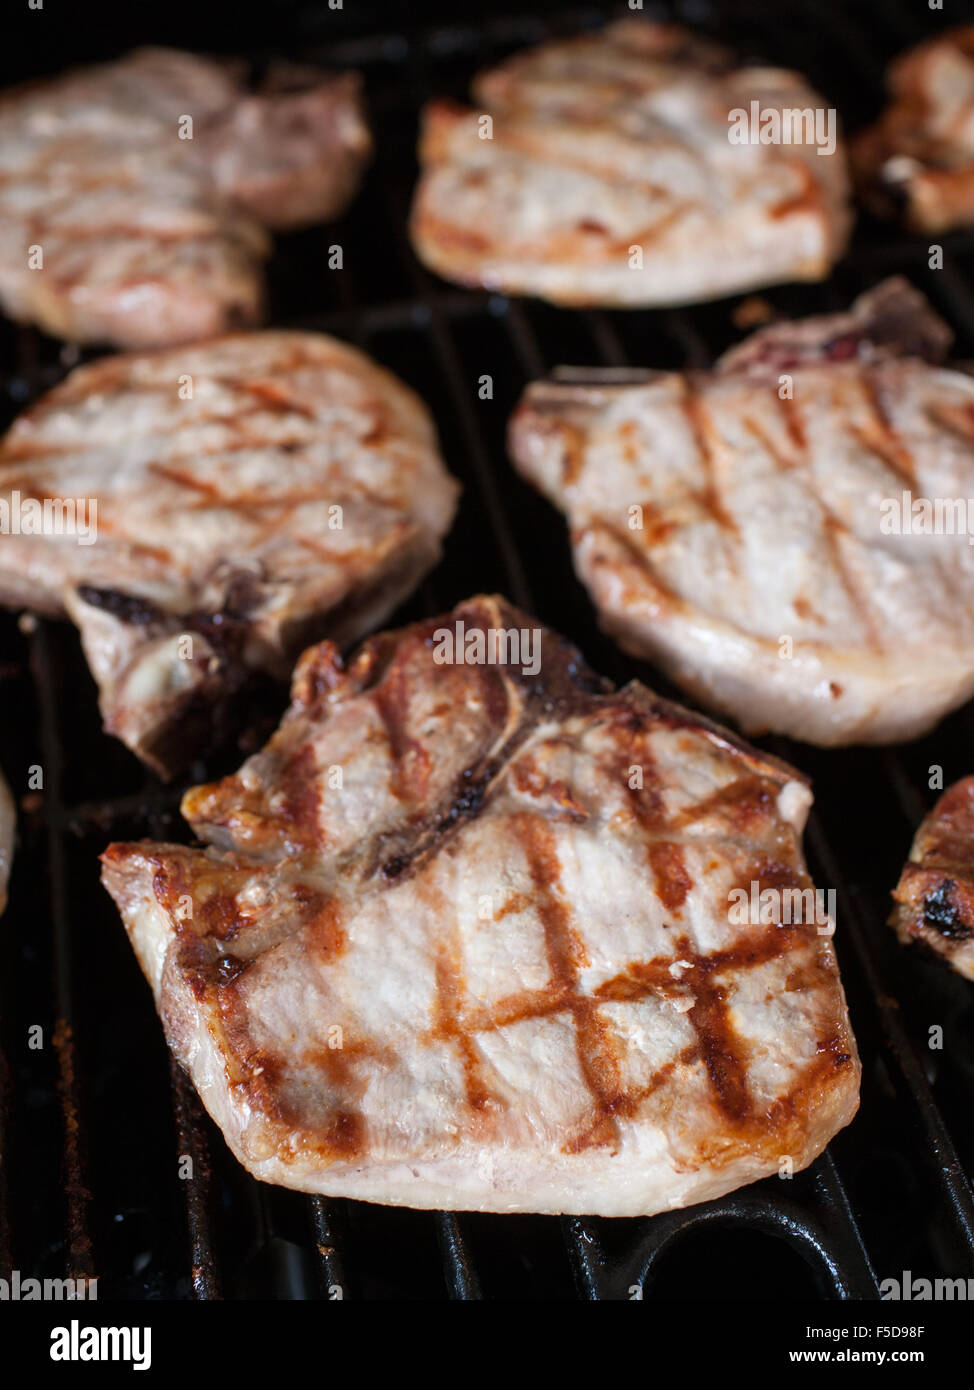 Pork Chops on the Grill Stock Photo